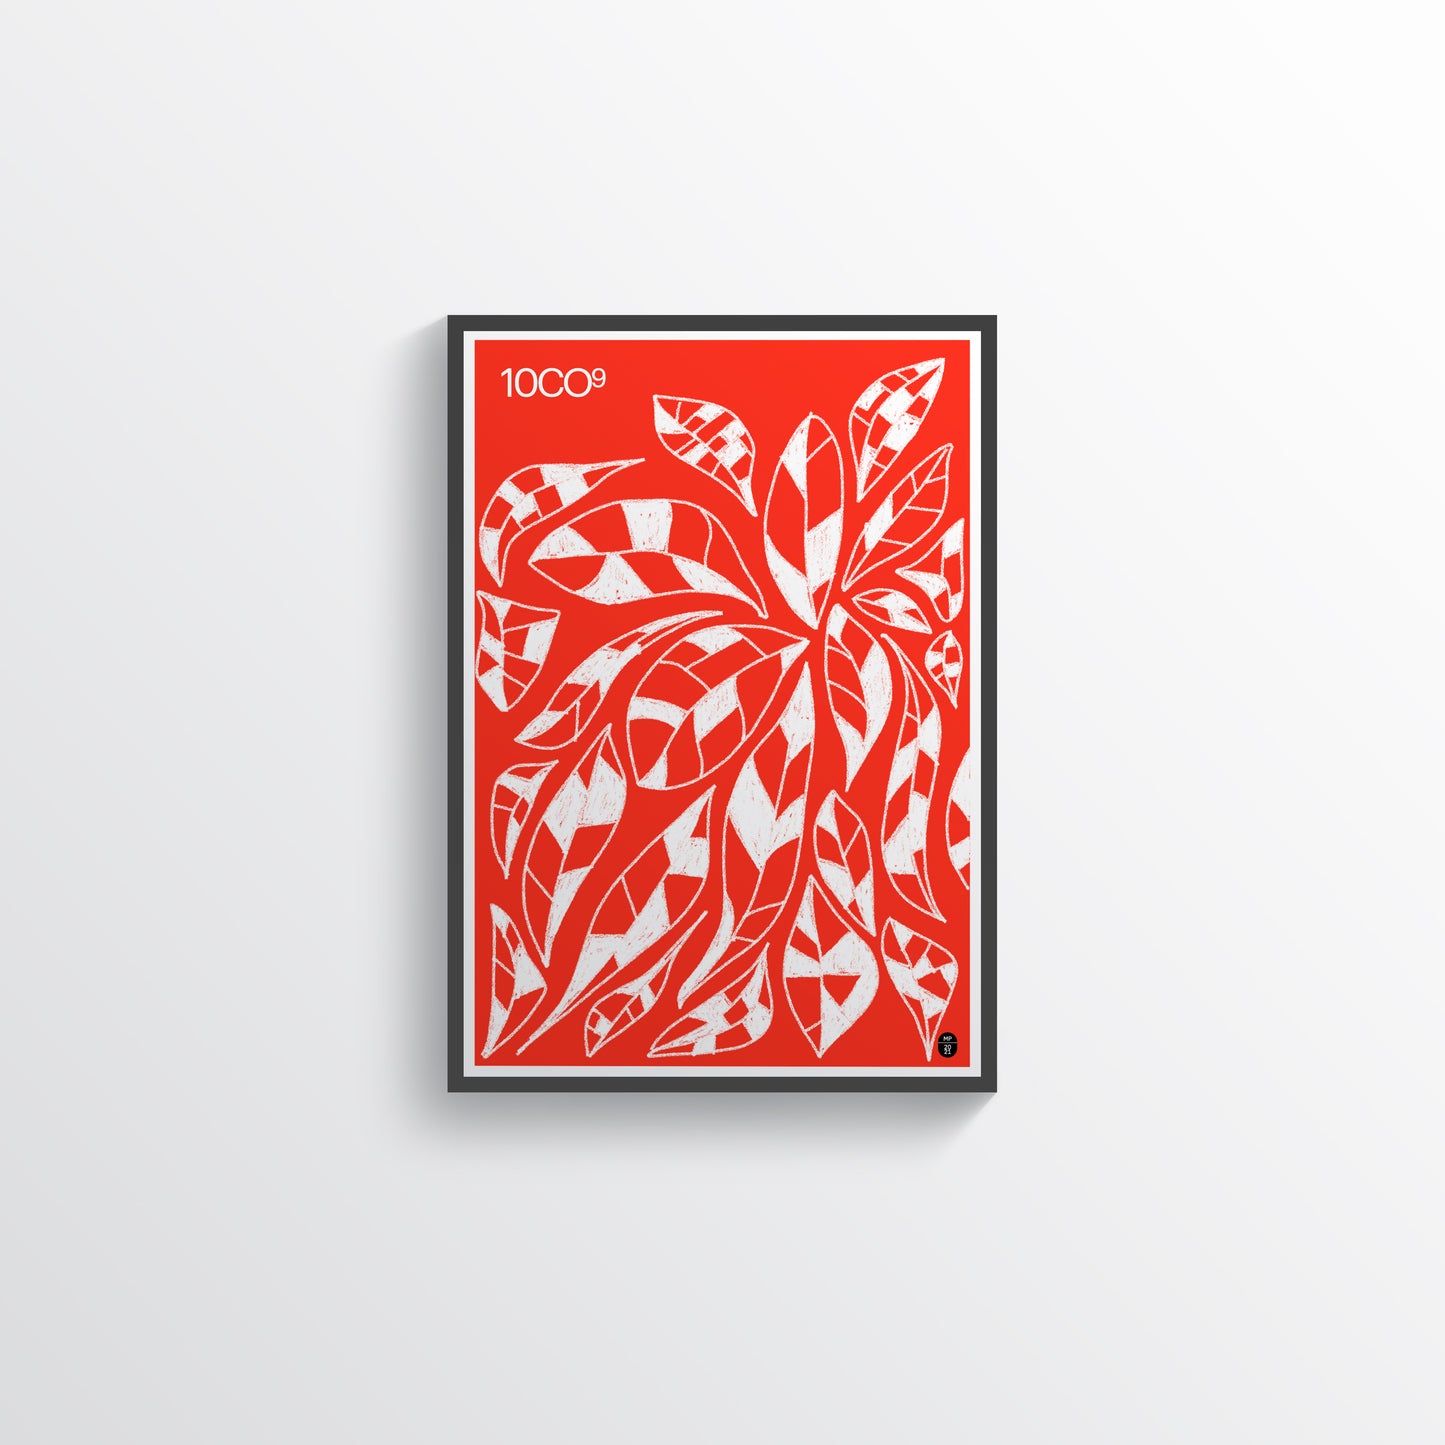 Handwritten leaves in white on a red background, available in C-Type print on Fuji Matt Crystal archive paper with a semi-matt finish. - Starting from 19 € / Shipped Worldwide